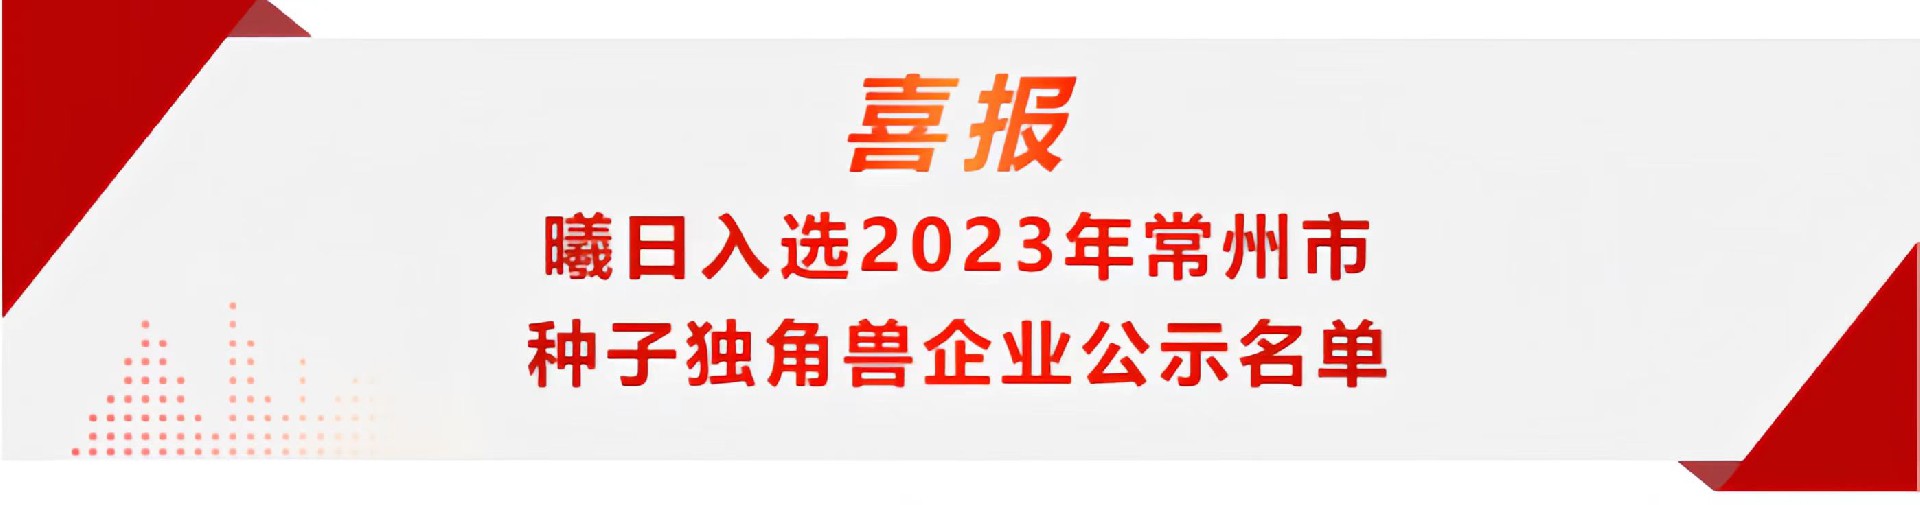 Xiri New Energy was selected into the public list of Changzhou seed unicorn enterprises in 2023